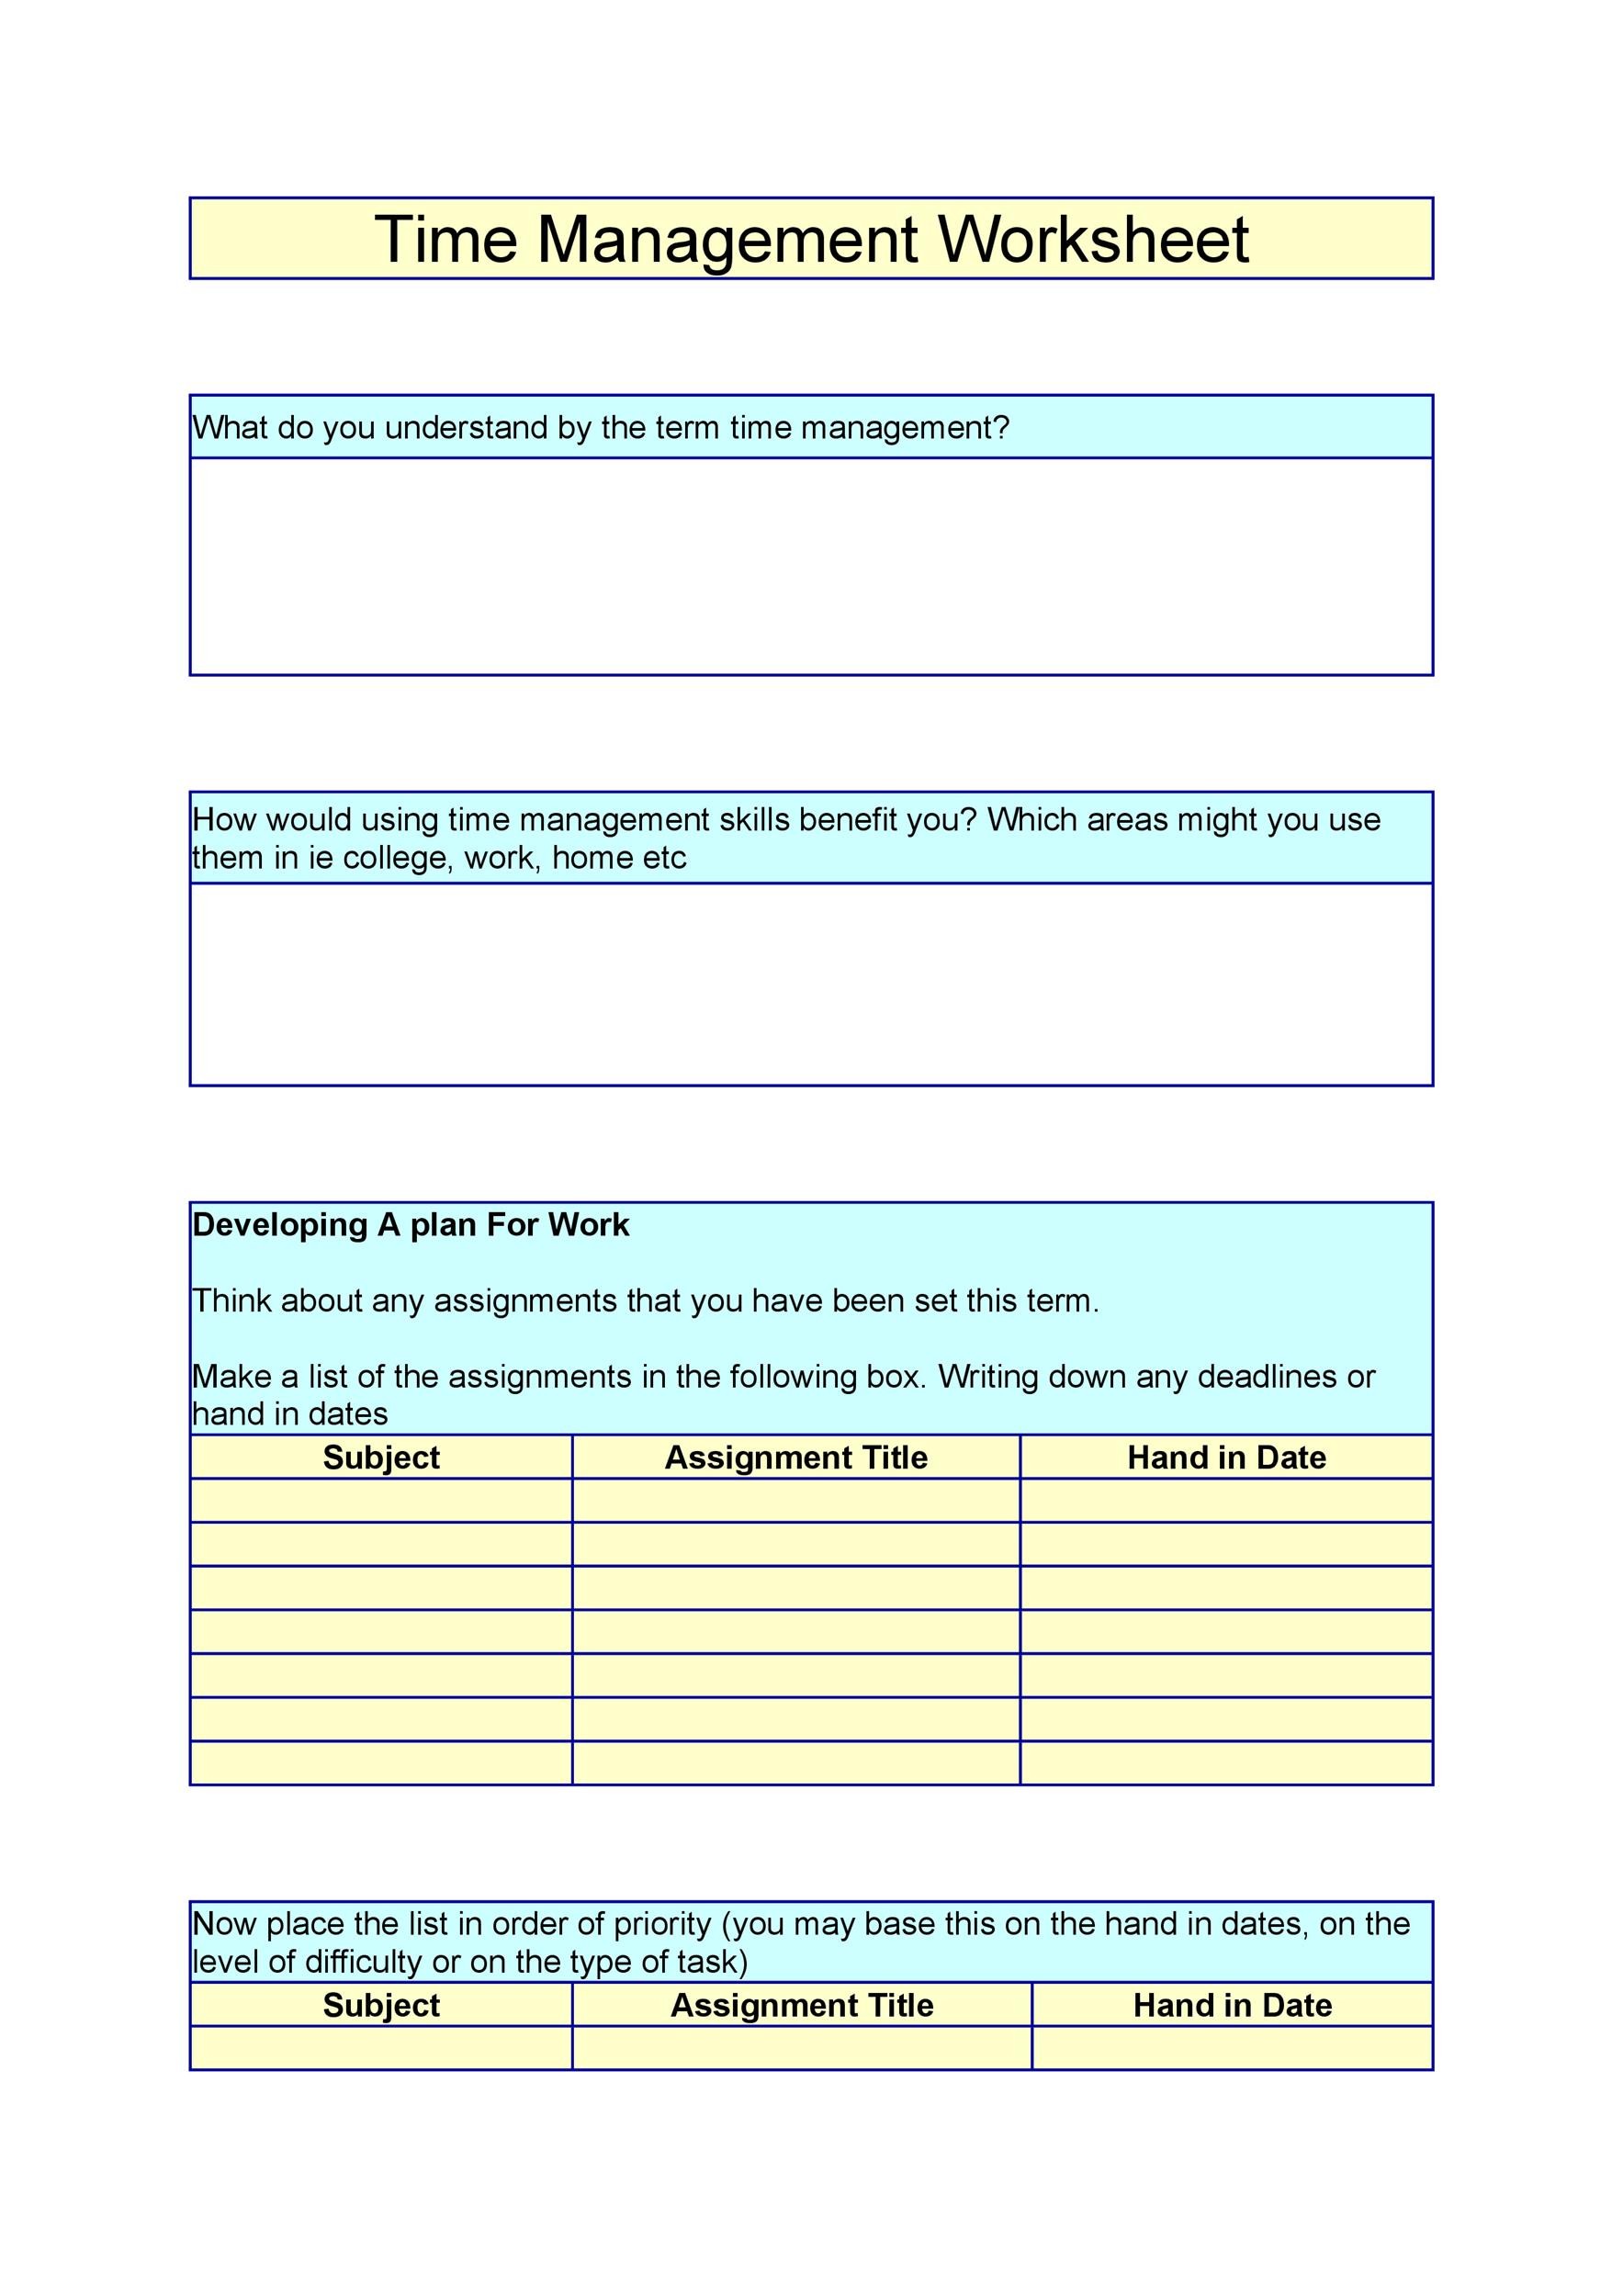 41-s-m-a-r-t-goal-setting-templates-worksheets-templatelab